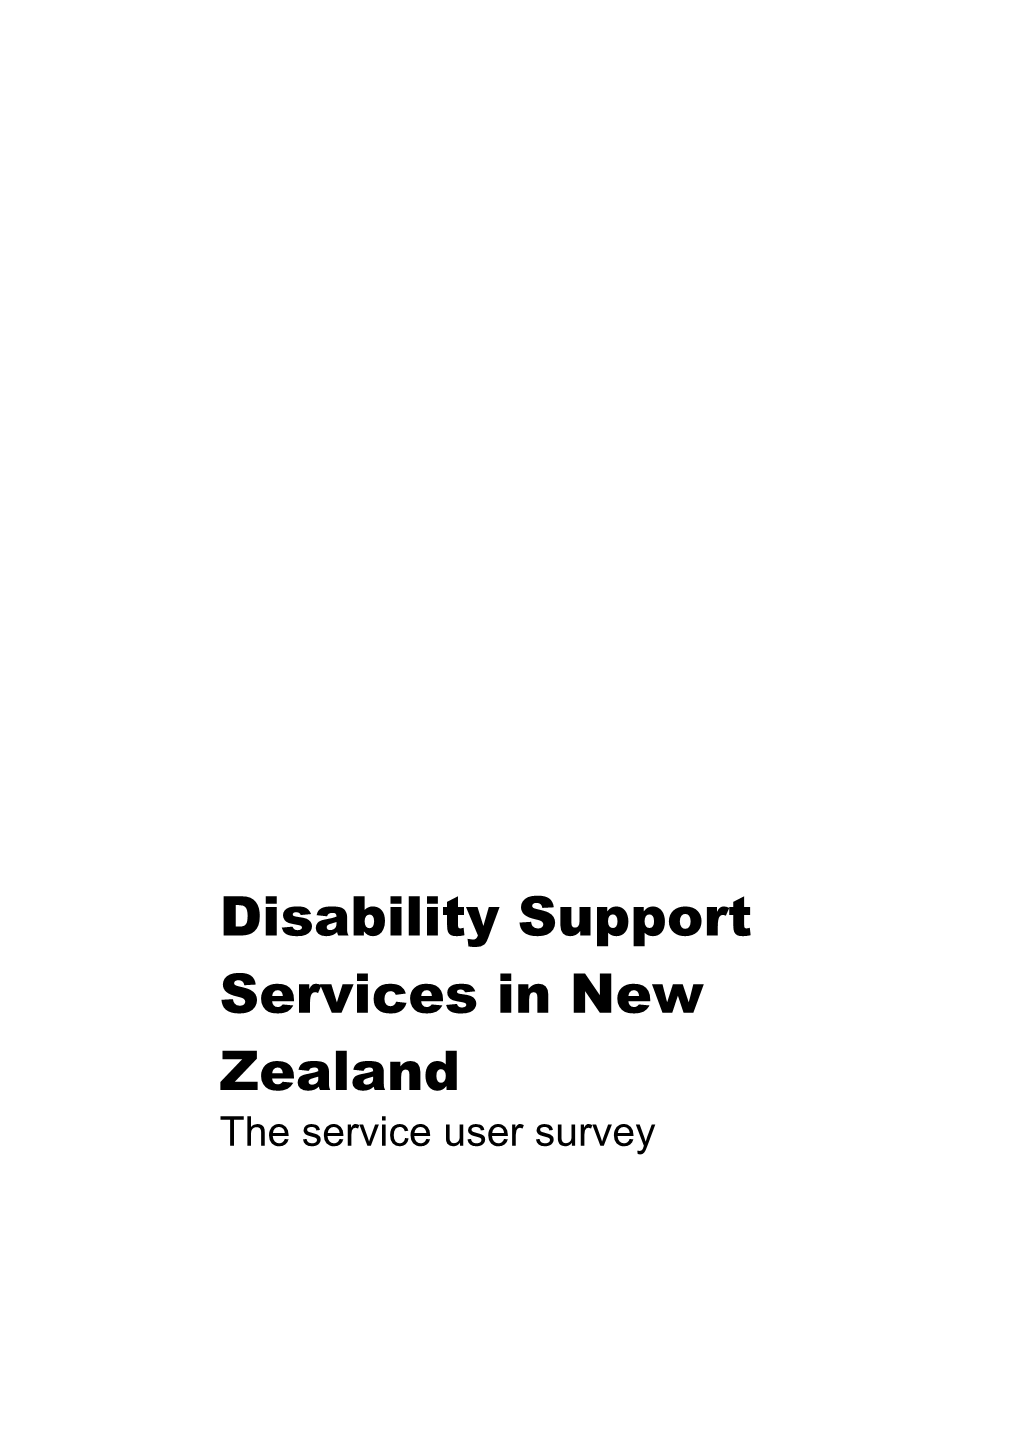 Disability Support Services in New Zealand s1